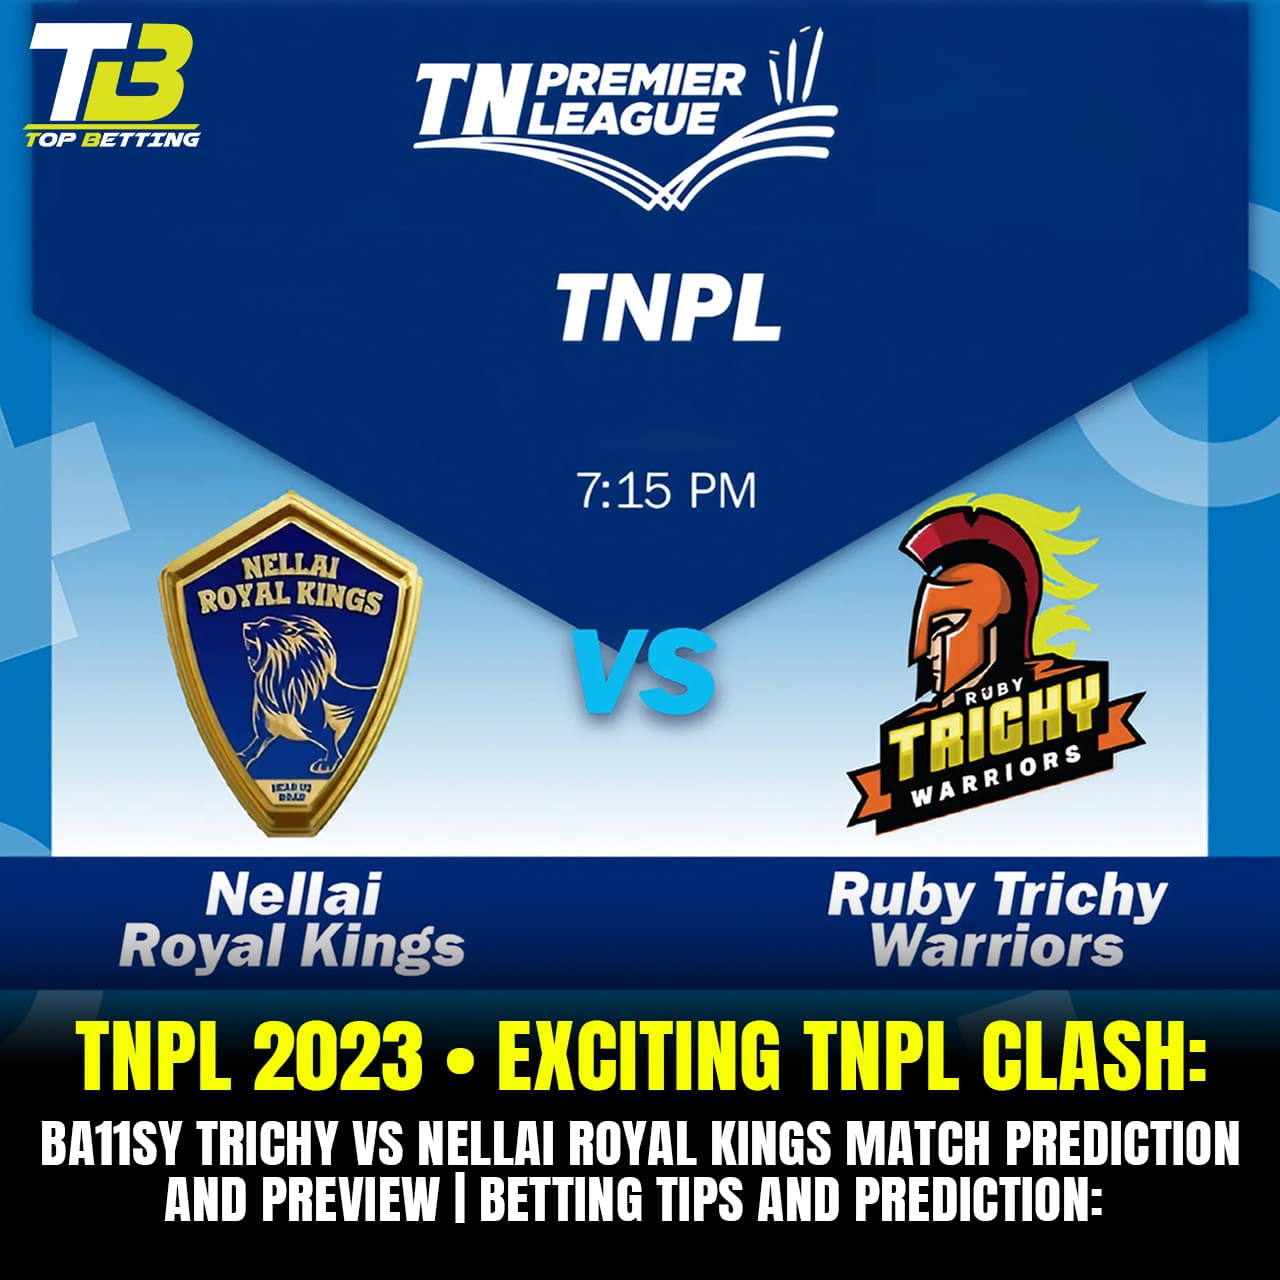 TNPL 2023 • Exciting TNPL Clash: Ba11sy Trichy vs Nellai Royal Kings Match Prediction and Preview | Betting Tips and Prediction: